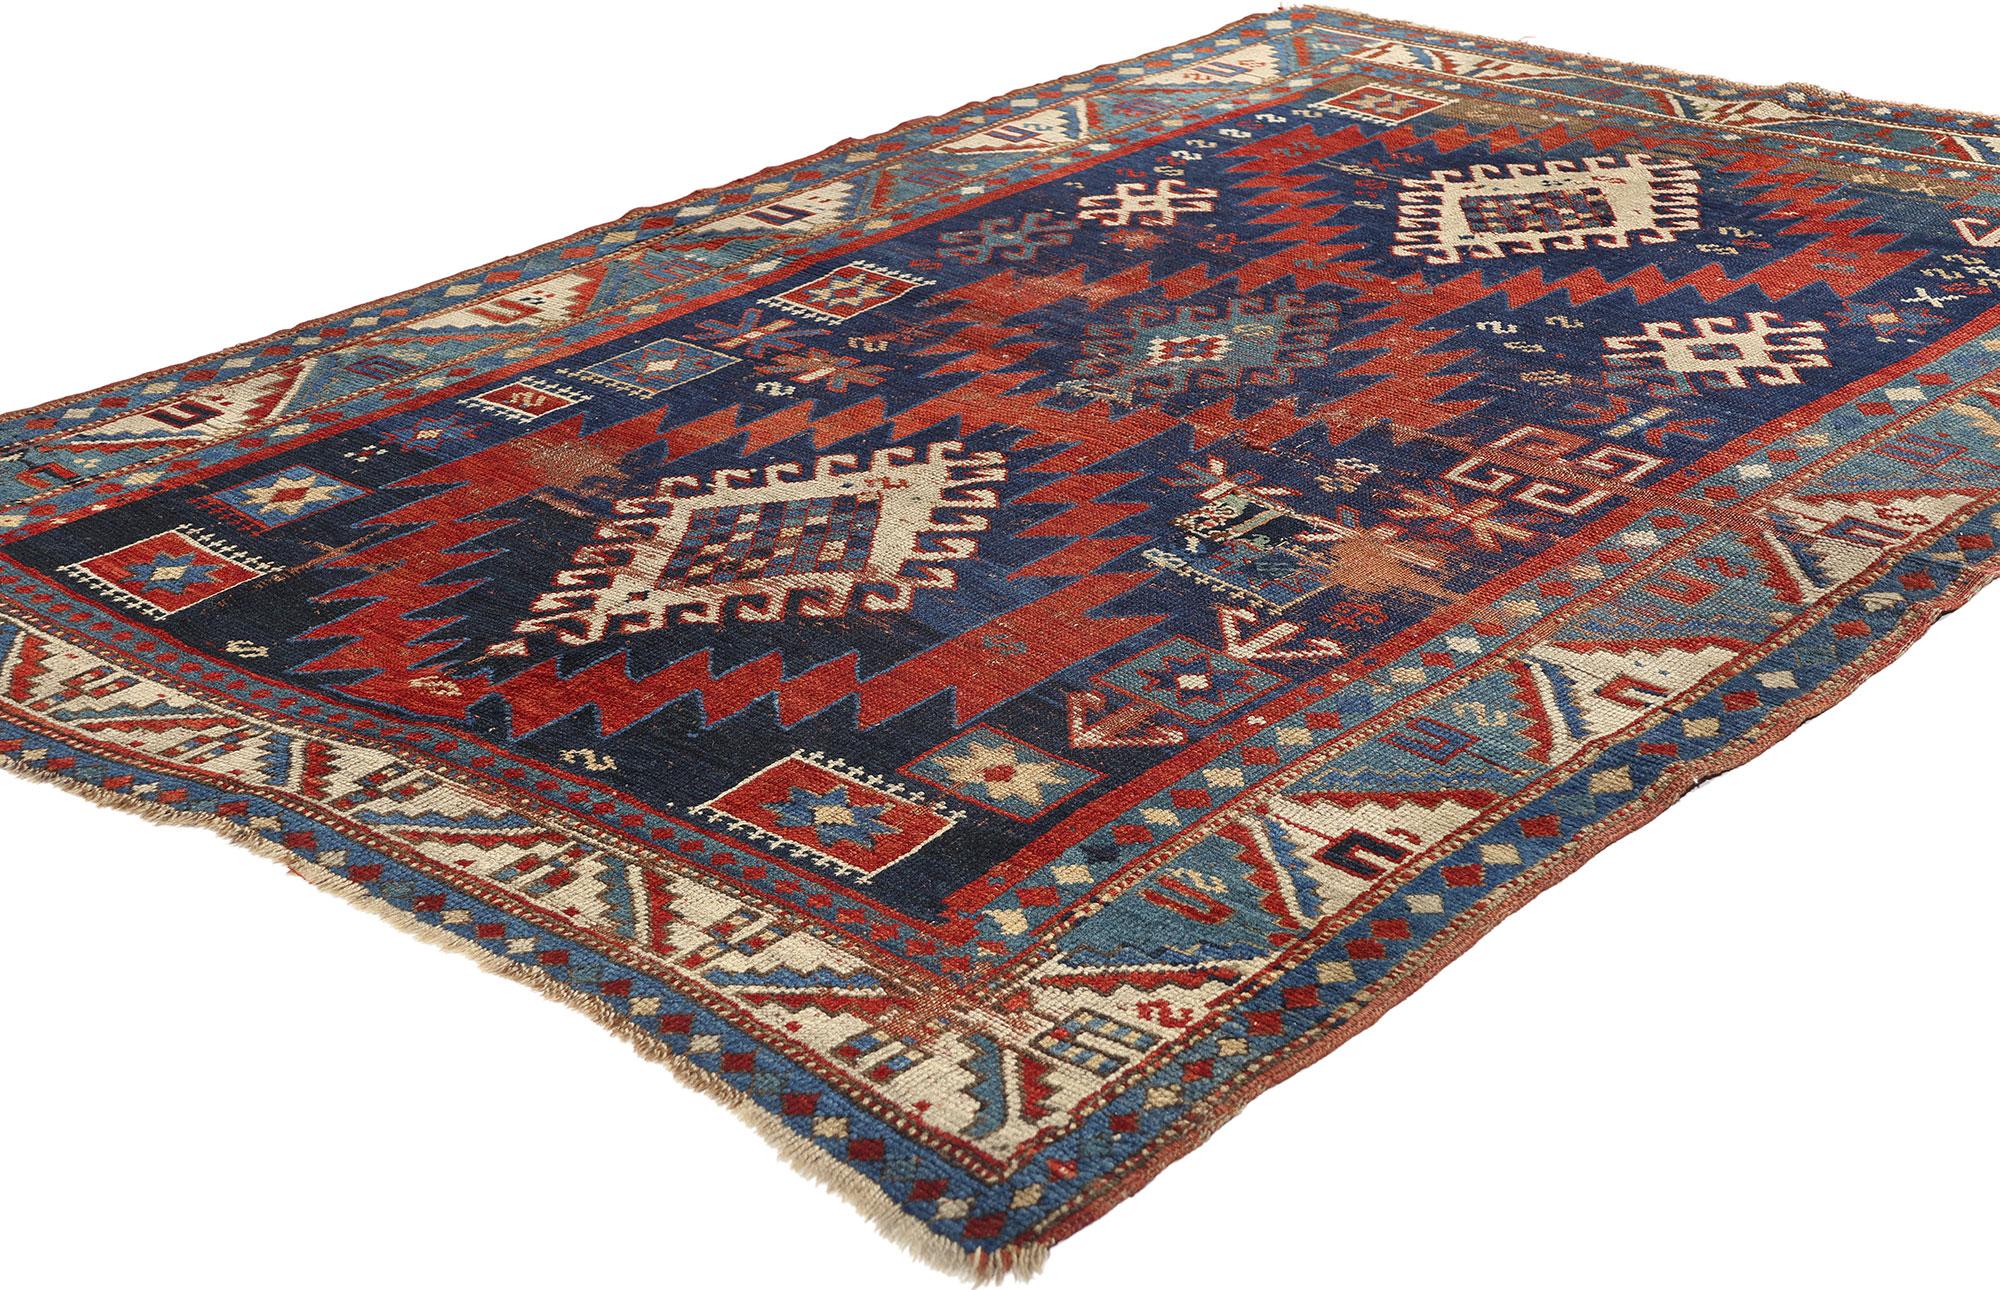 78210 Antique Caucasian Kazak Rug, 04'06 x 06'06. Caucasian Kazak rugs, originating from the Caucasus region and particularly associated with the Kazakh people, represent a rich tradition of handwoven craftsmanship. These rugs are celebrated for